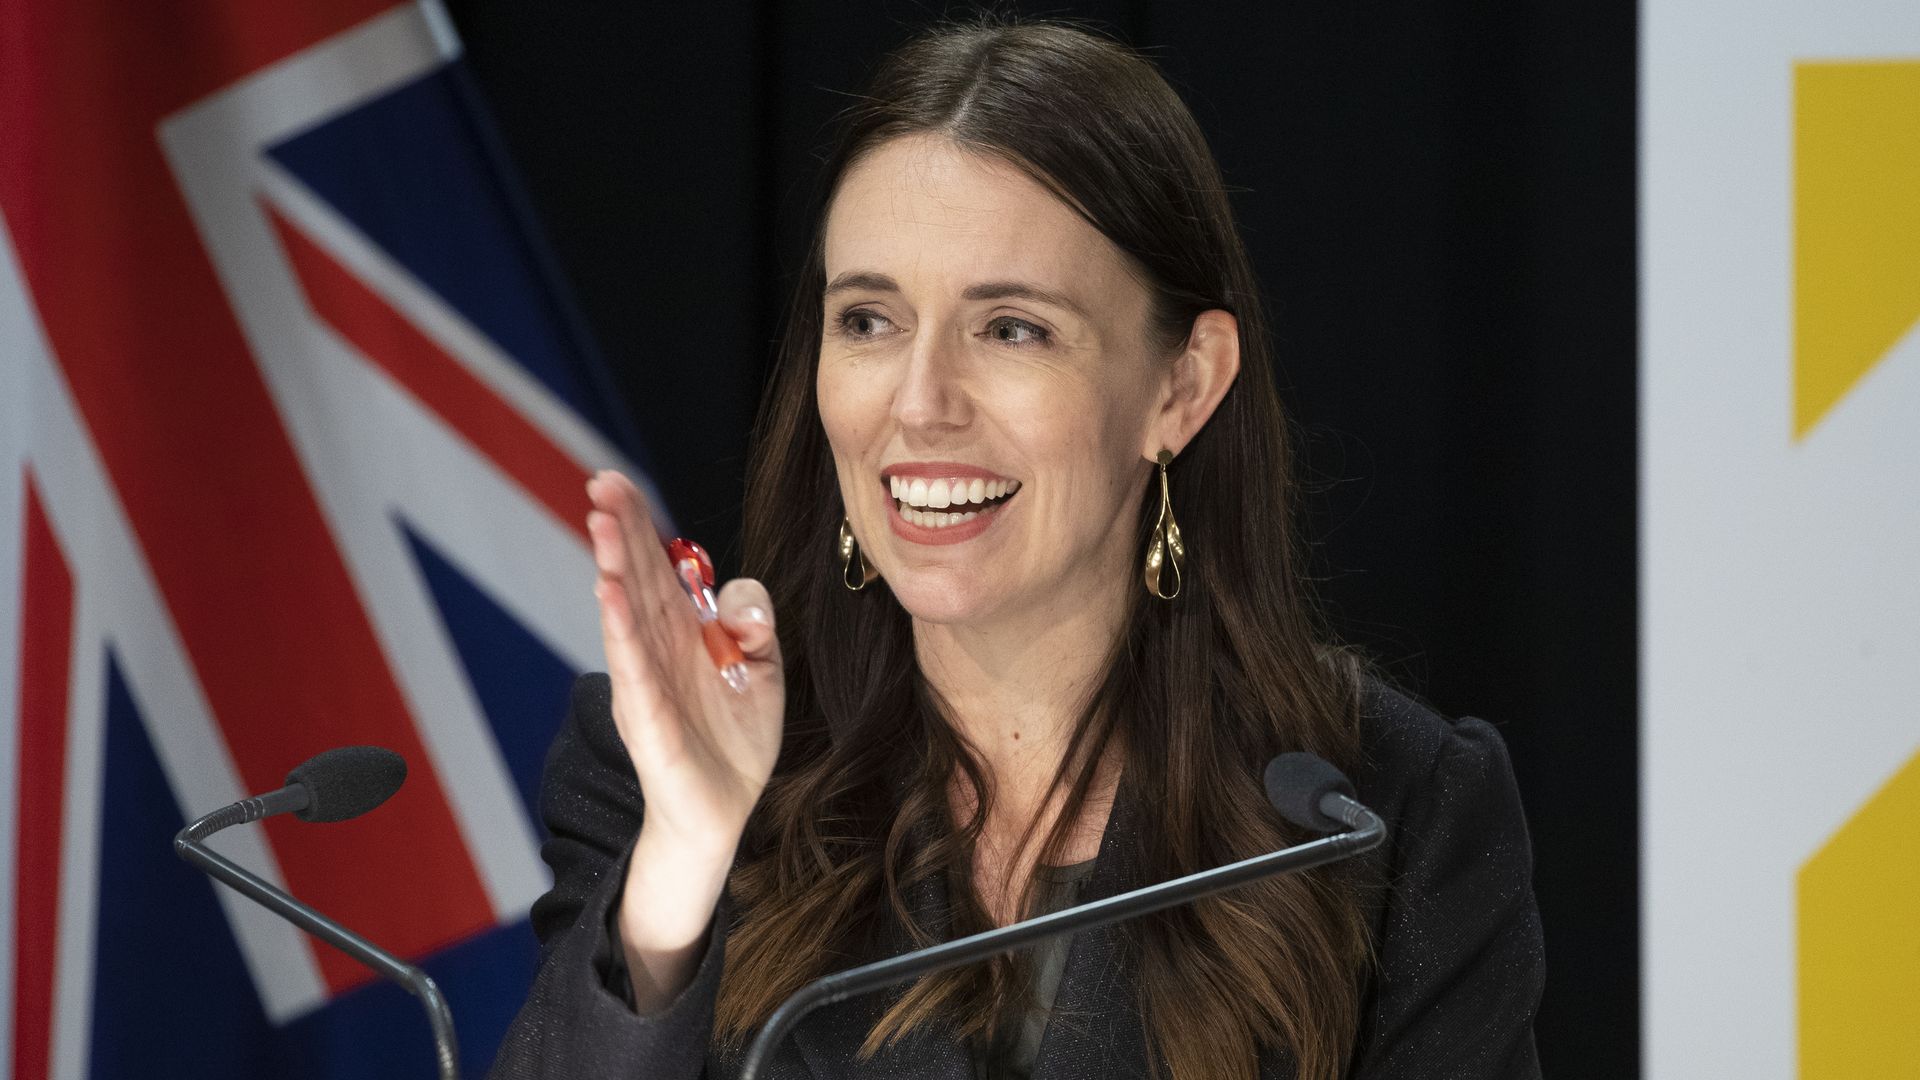   Prime Minister Jacinda Ardern speaks during a press conference at Parliament on November 22, 2021 in Wellington, New Zealand. 